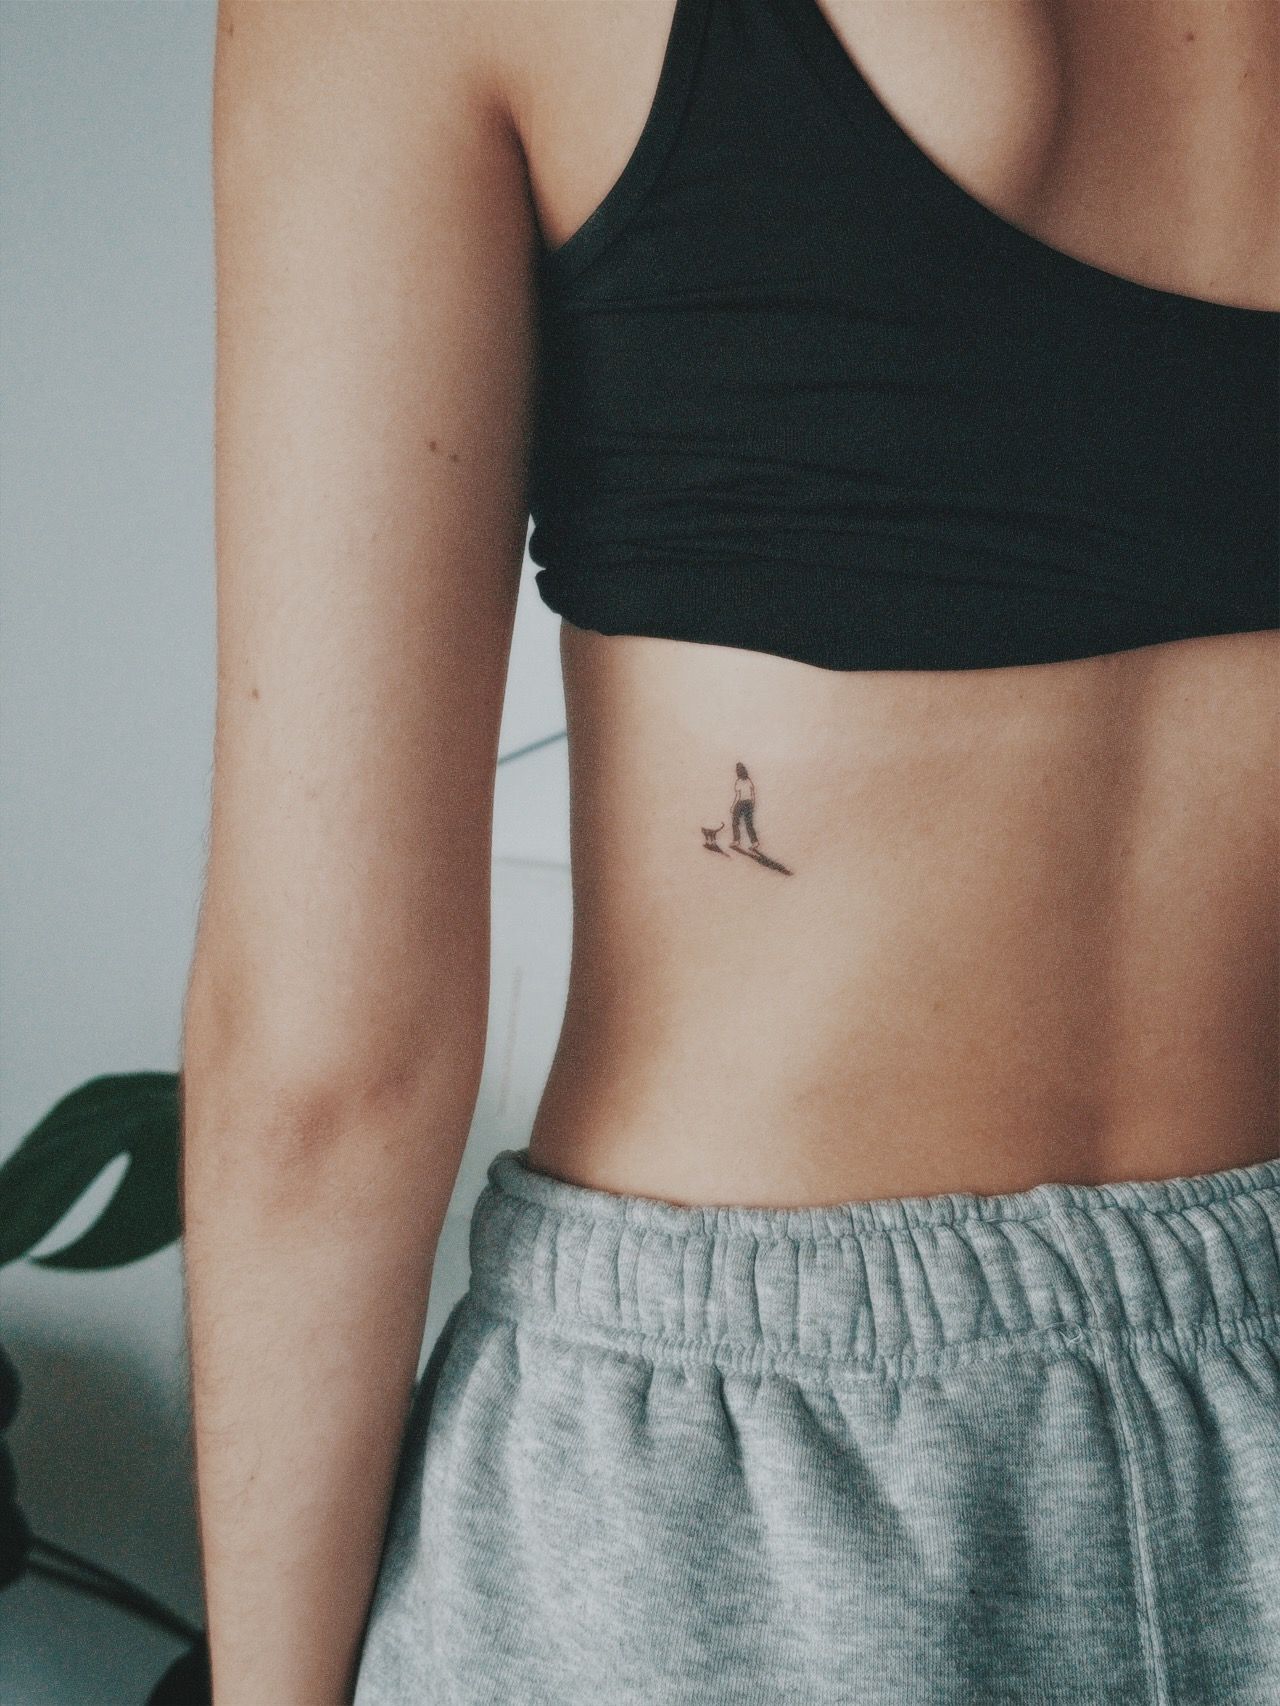 The Best Side Rib Tattoo Ideas To Try For Your Next Ink